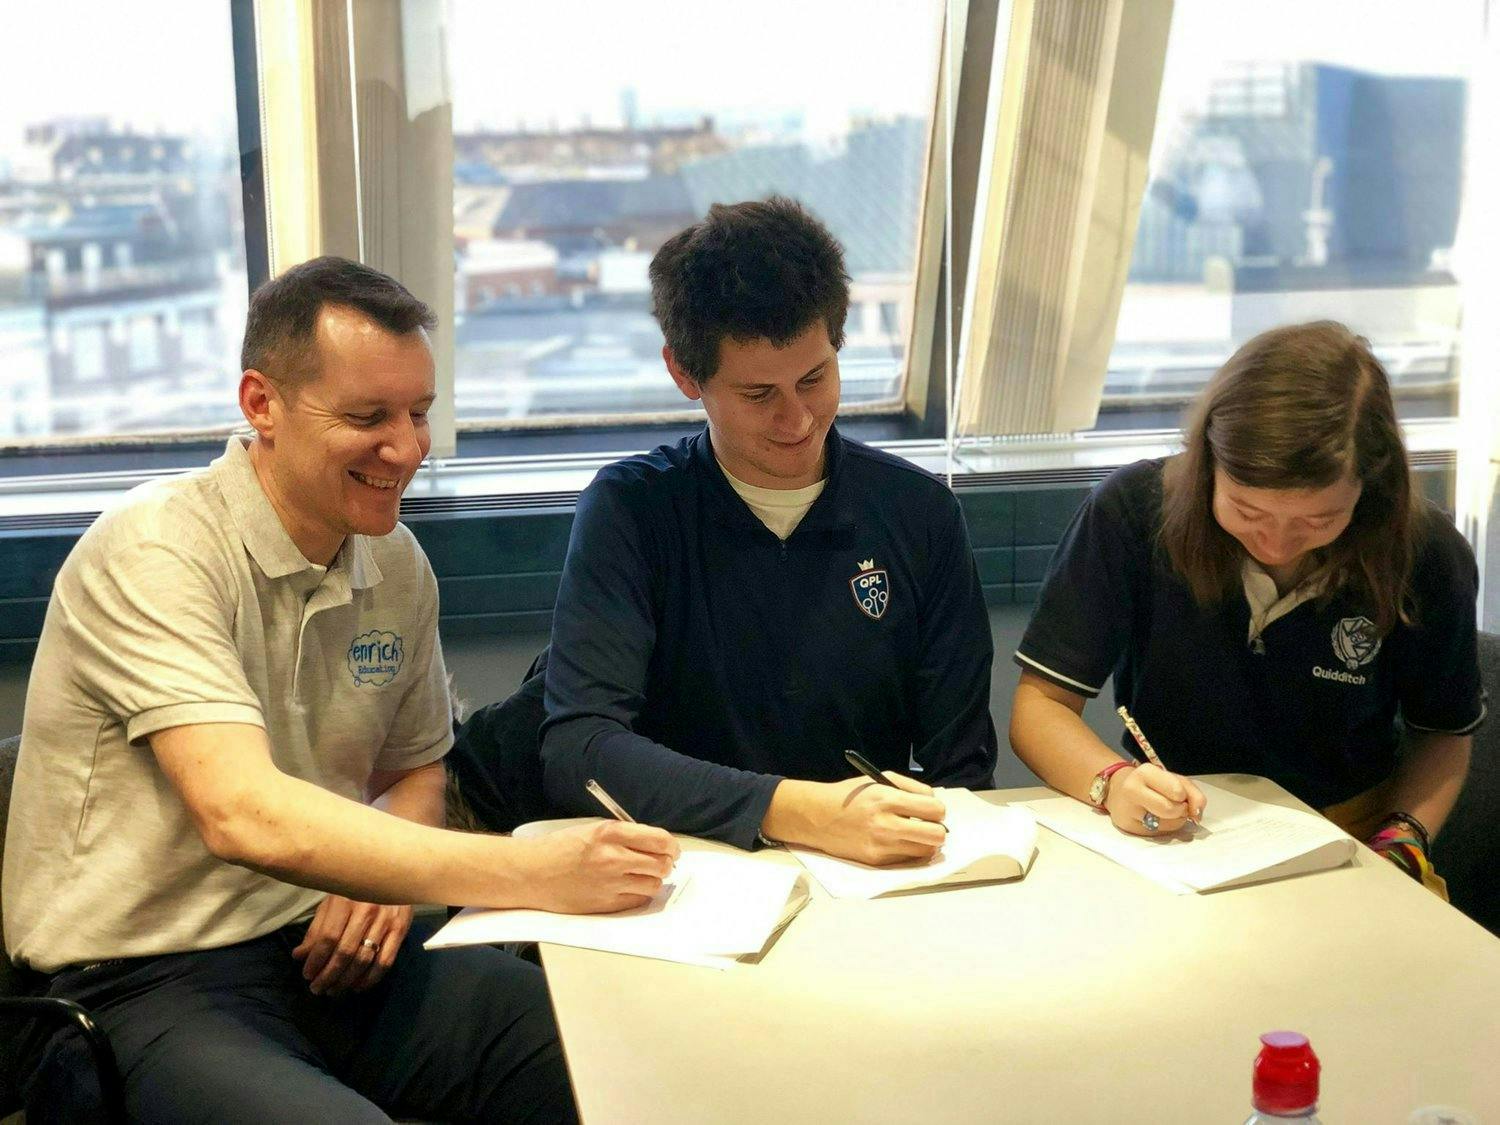 Representatives from QPL, QuidditchUK and Enrich education sign papers